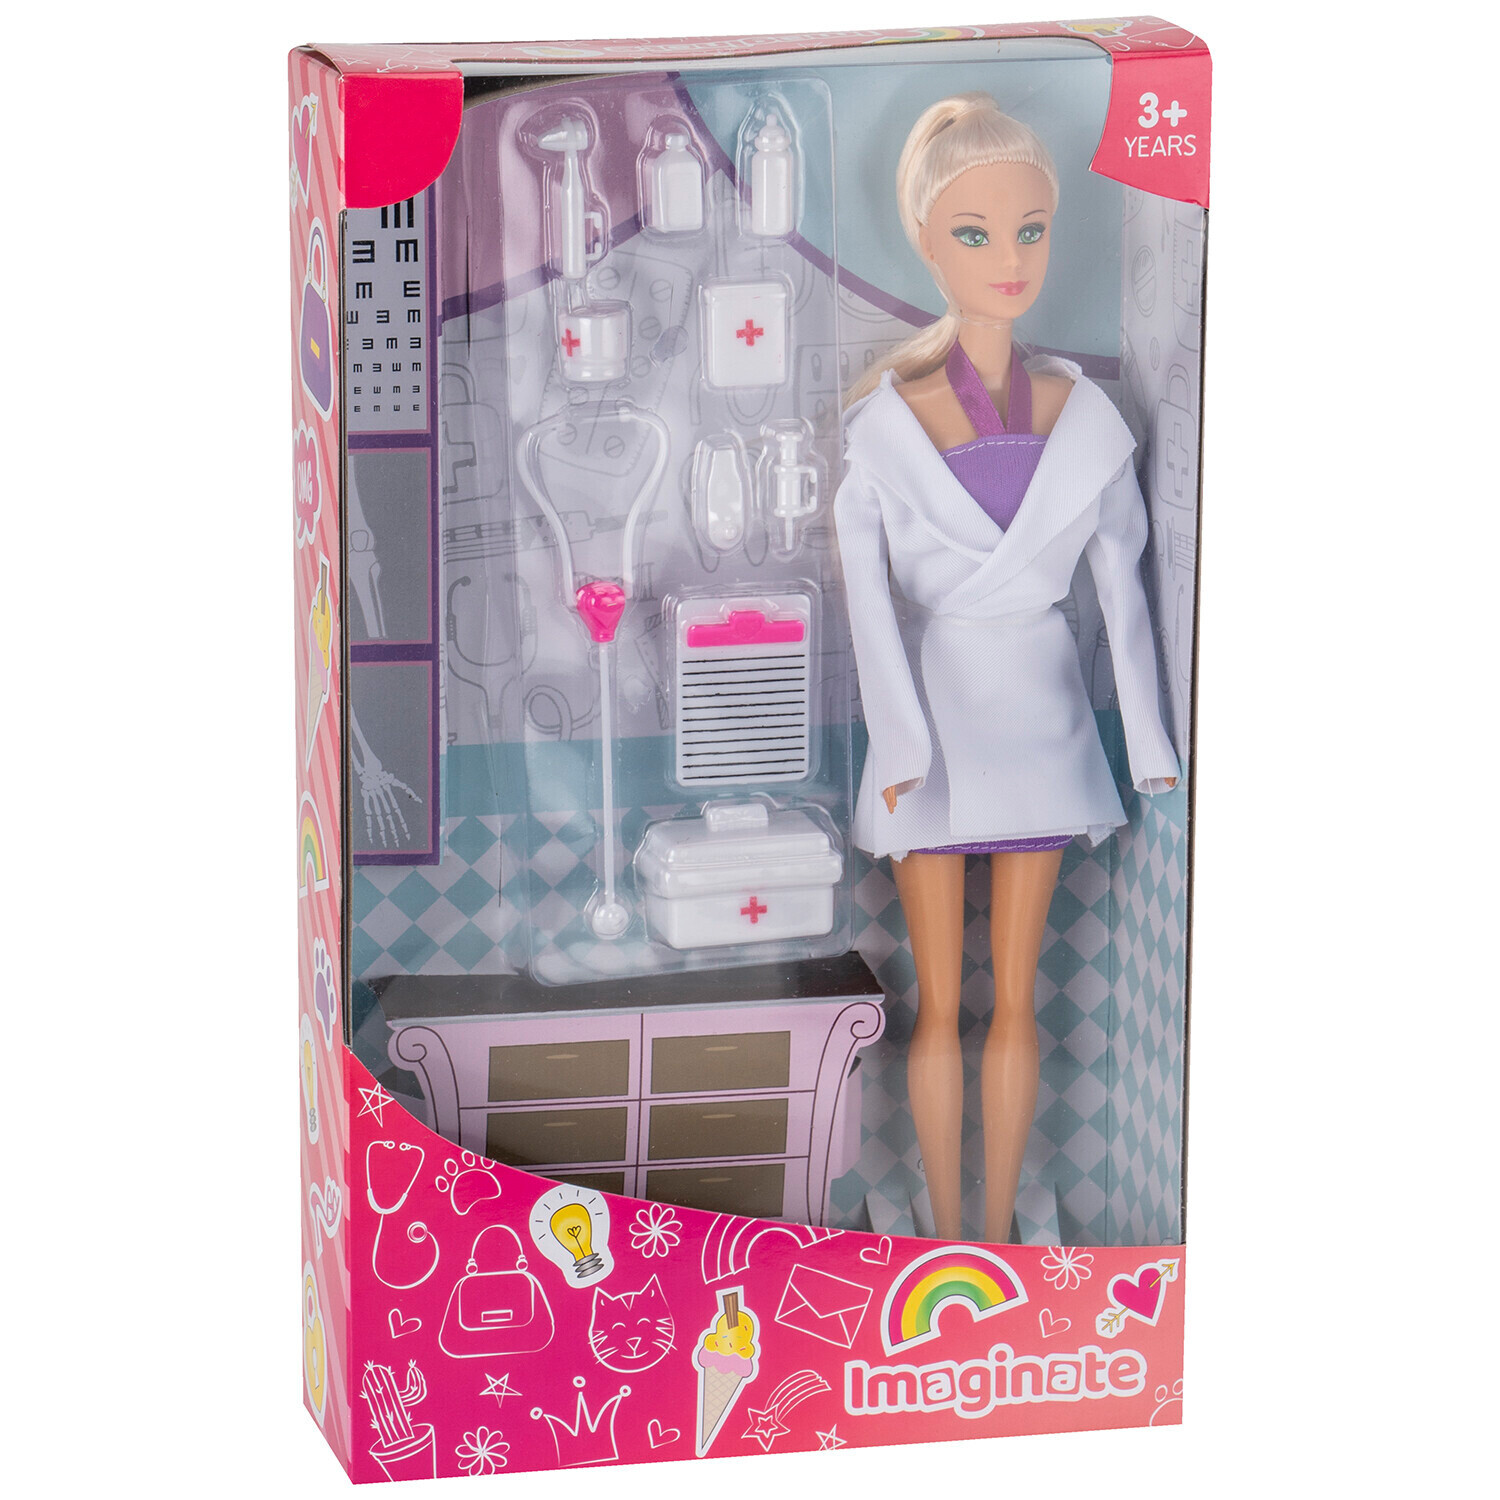 Imaginate Doctor Doll and Accessories Image